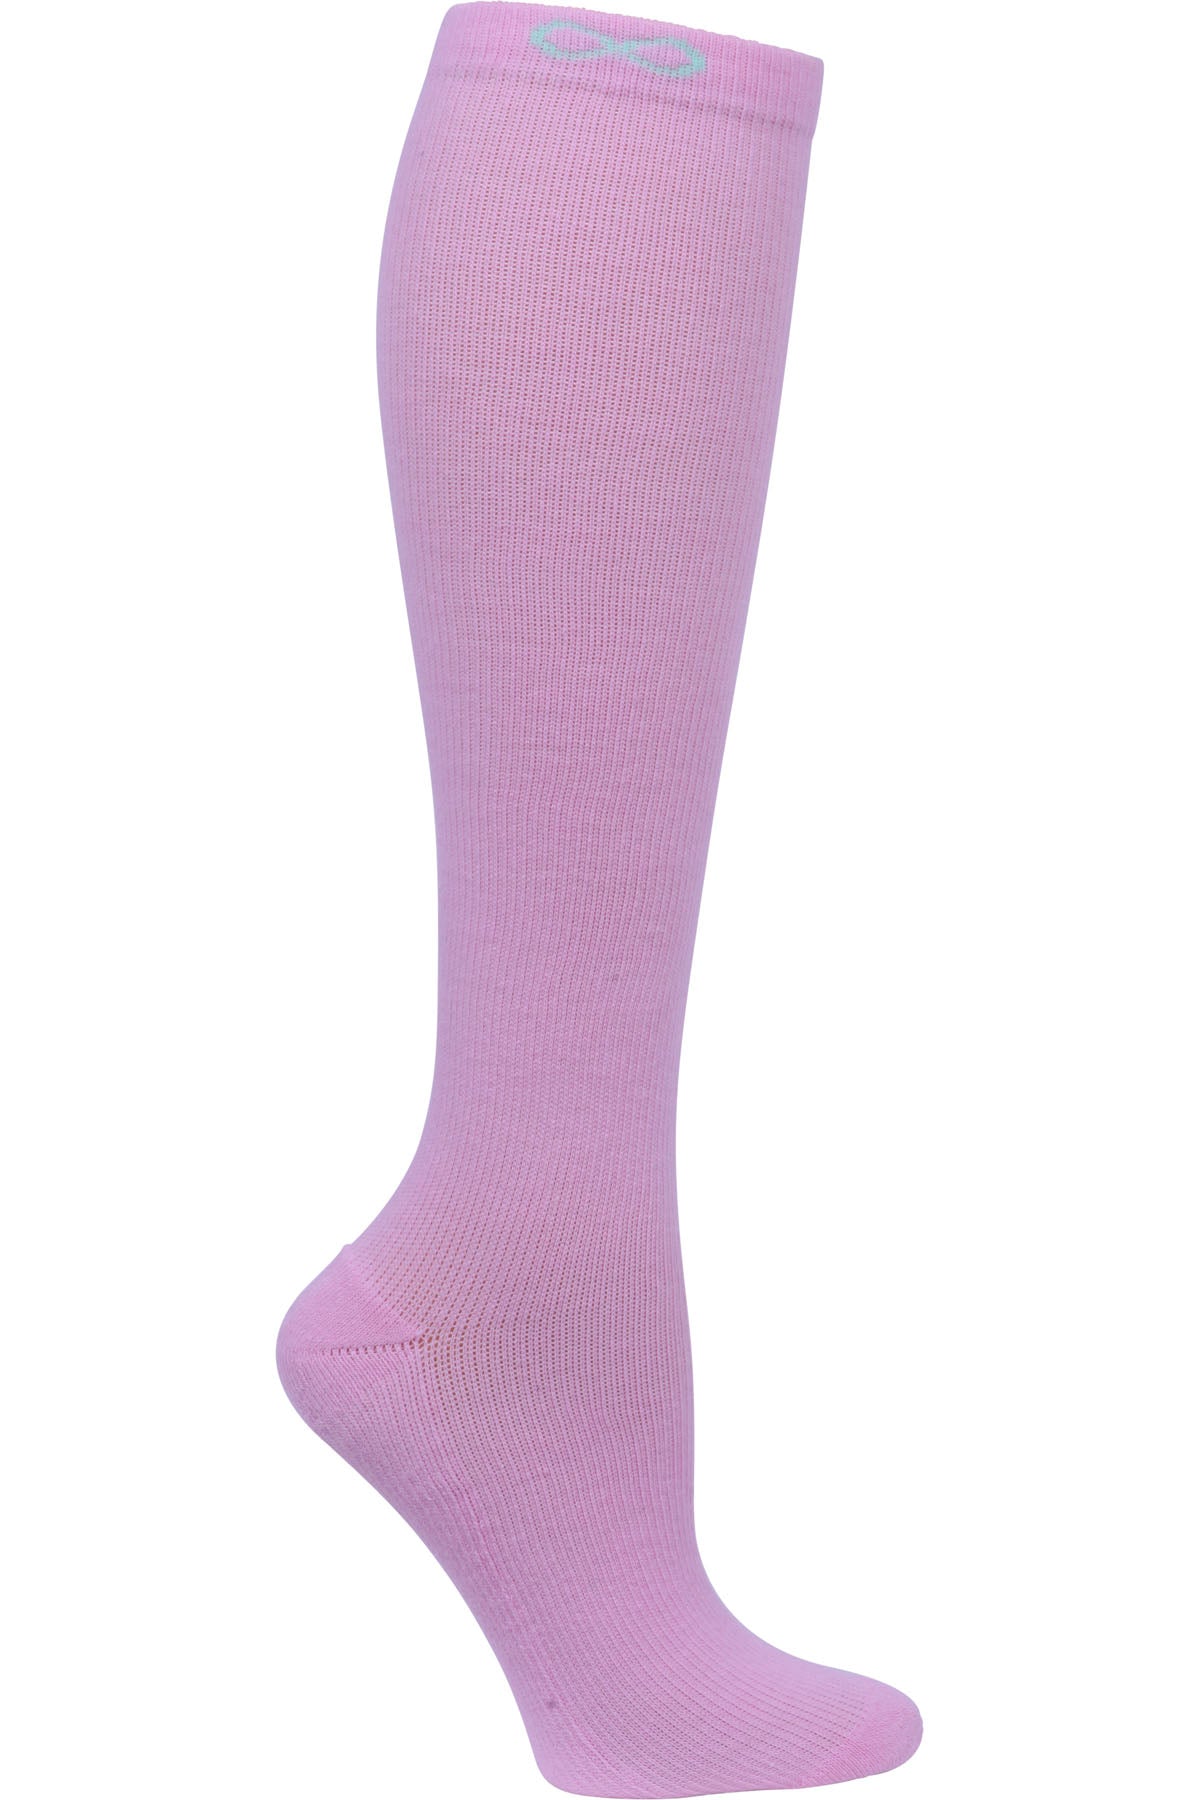 Cherokee Moderate Compression Socks Infinity Kickstart 15-20 mmHg Pastel Peony at Parker's Clothing and Shoes.